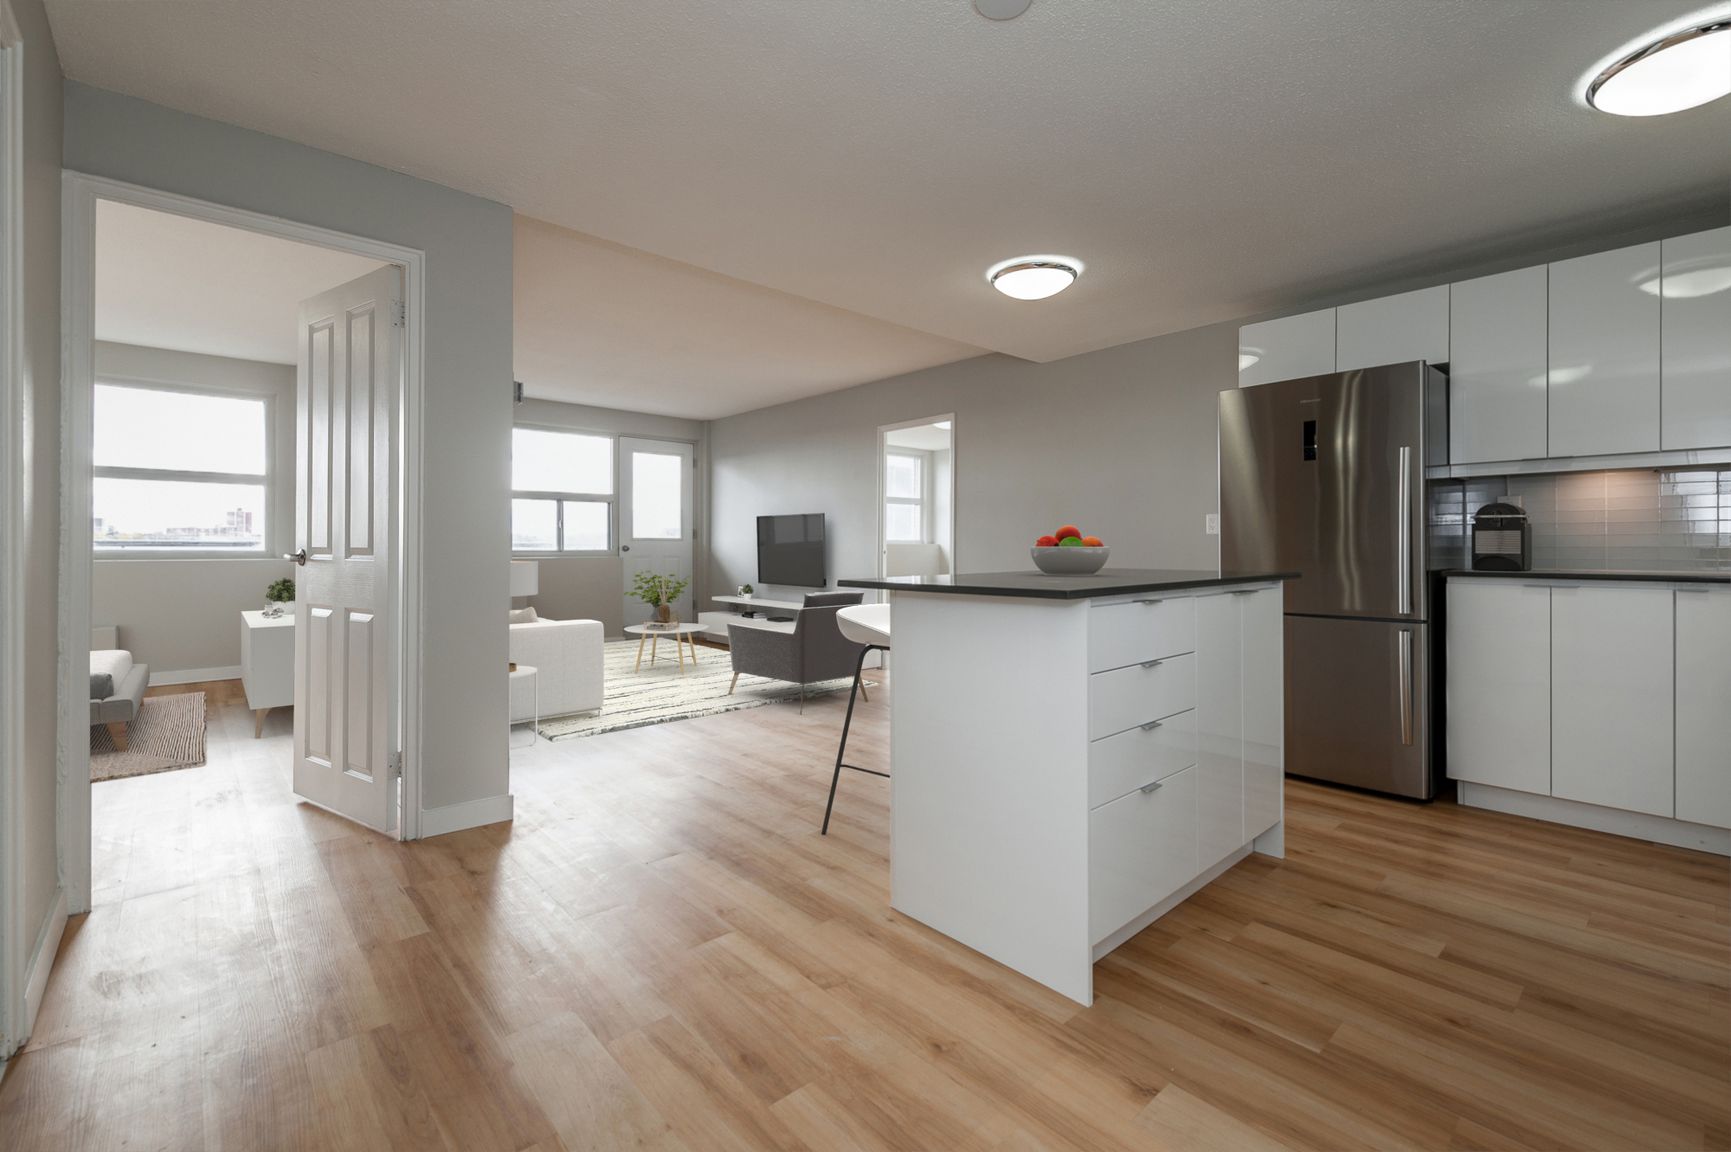 1 bedroom apartment of 59 sq. ft in Ottawa